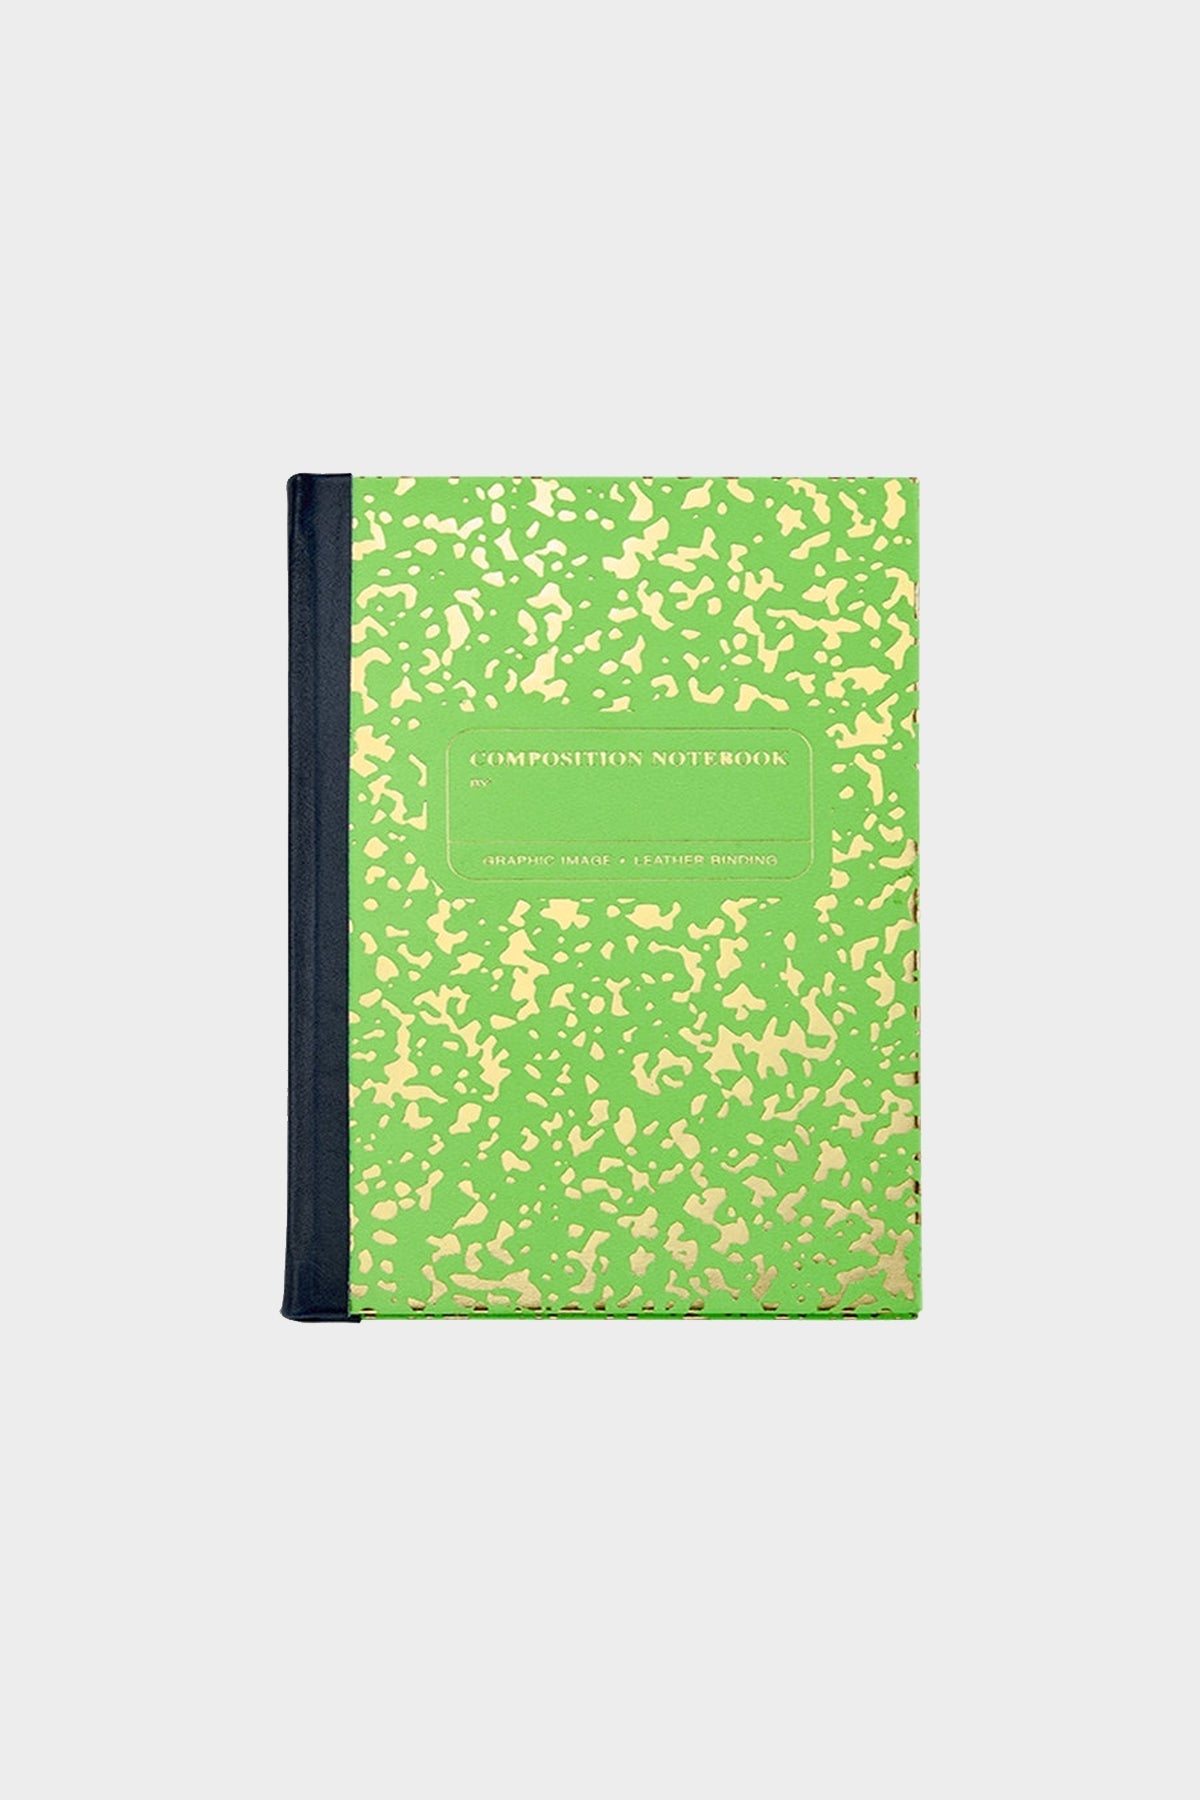 Composition Notebook in Neon Green/Gold - shop-olivia.com